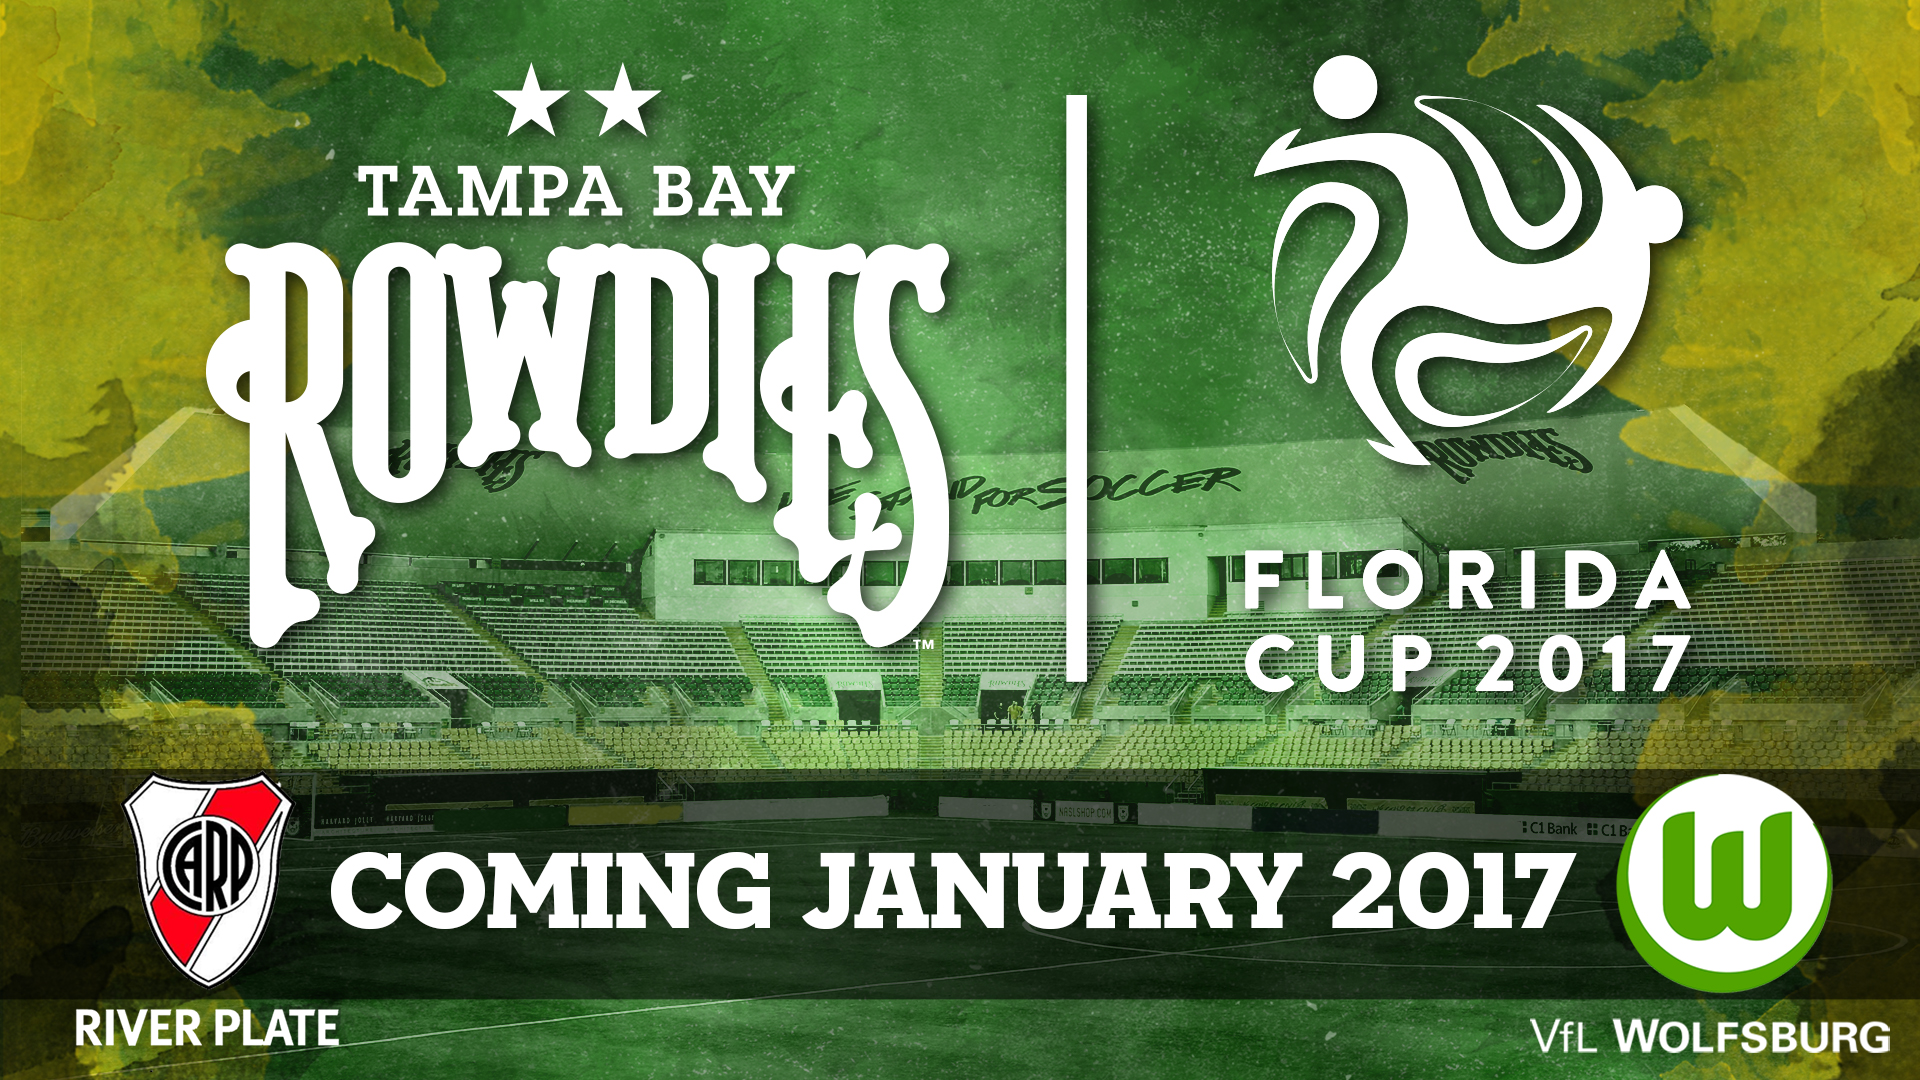 Full 2023 Schedule Confirmed - Tampa Bay Rowdies